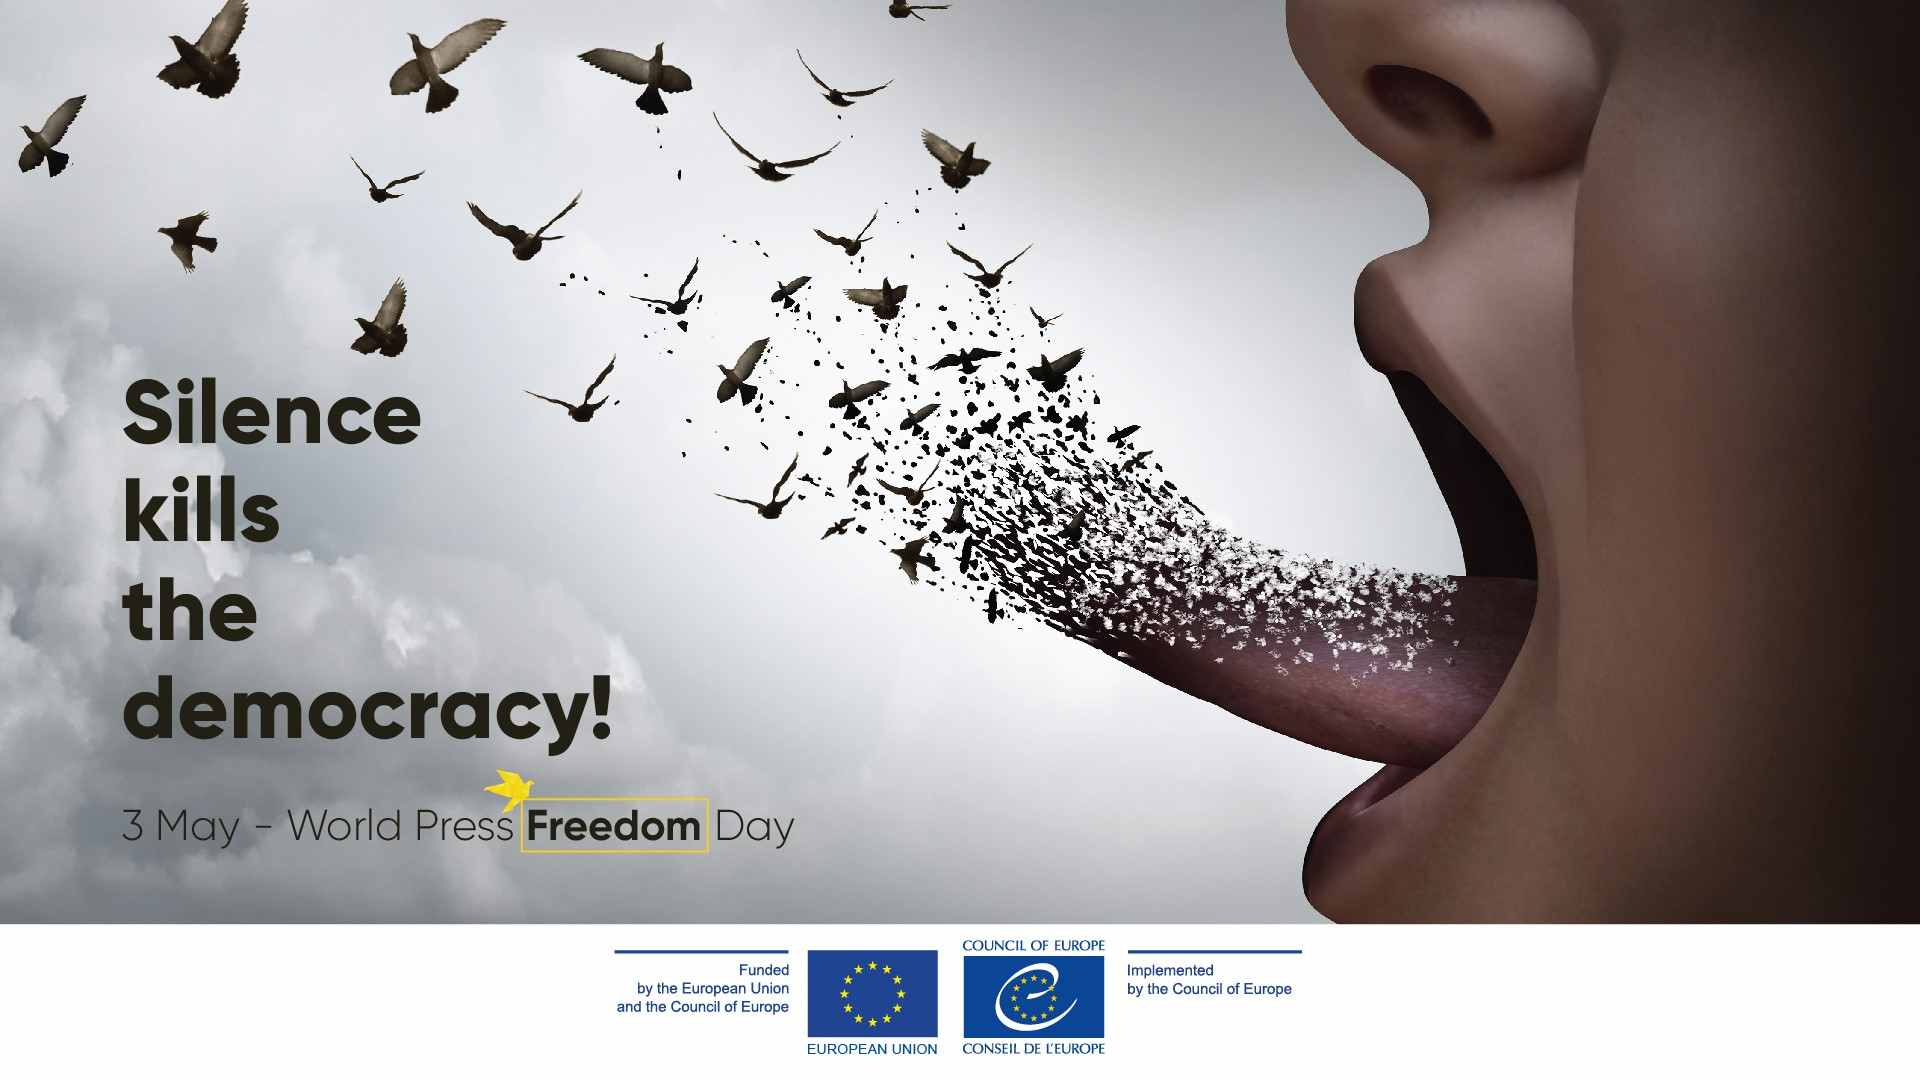 'Silence kills the democracy' – a campaign to mark the World Press Freedom Day - 3 May